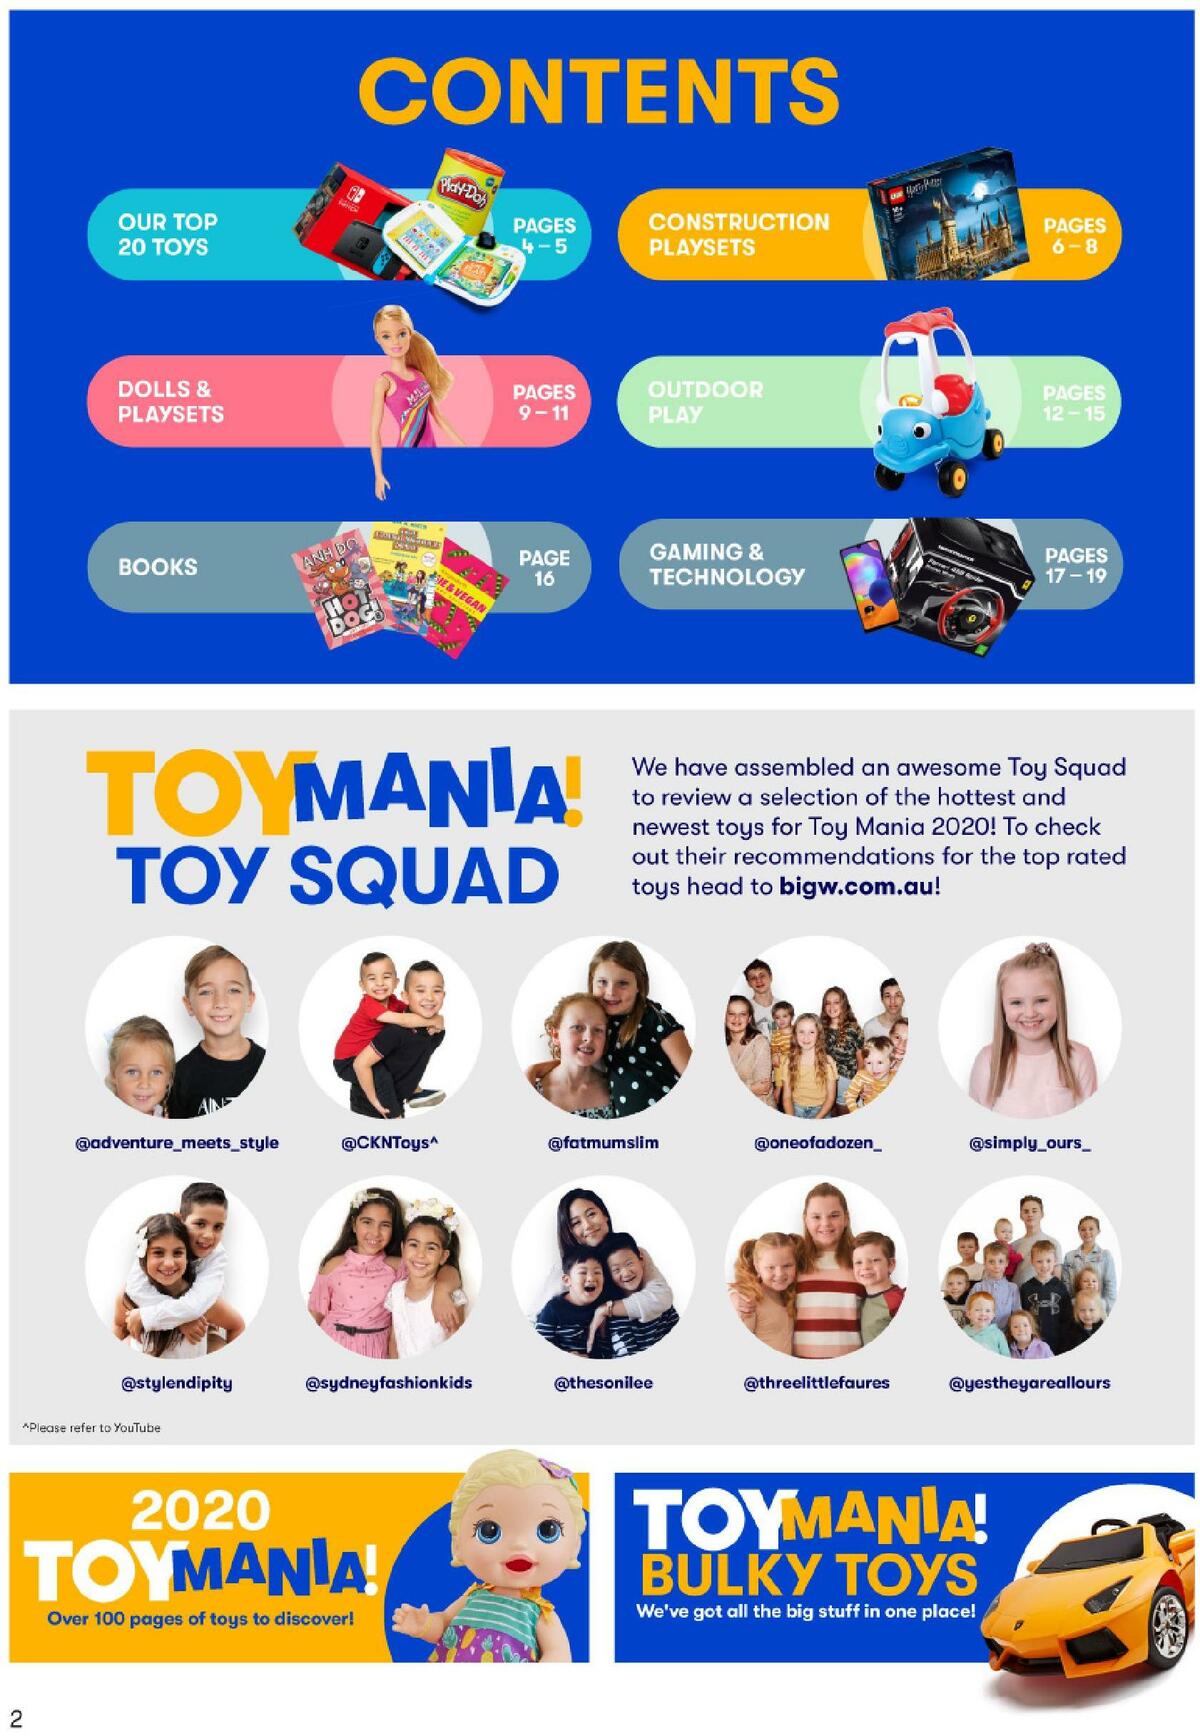 Big W Even More Toy Mania! Catalogues from 16 June